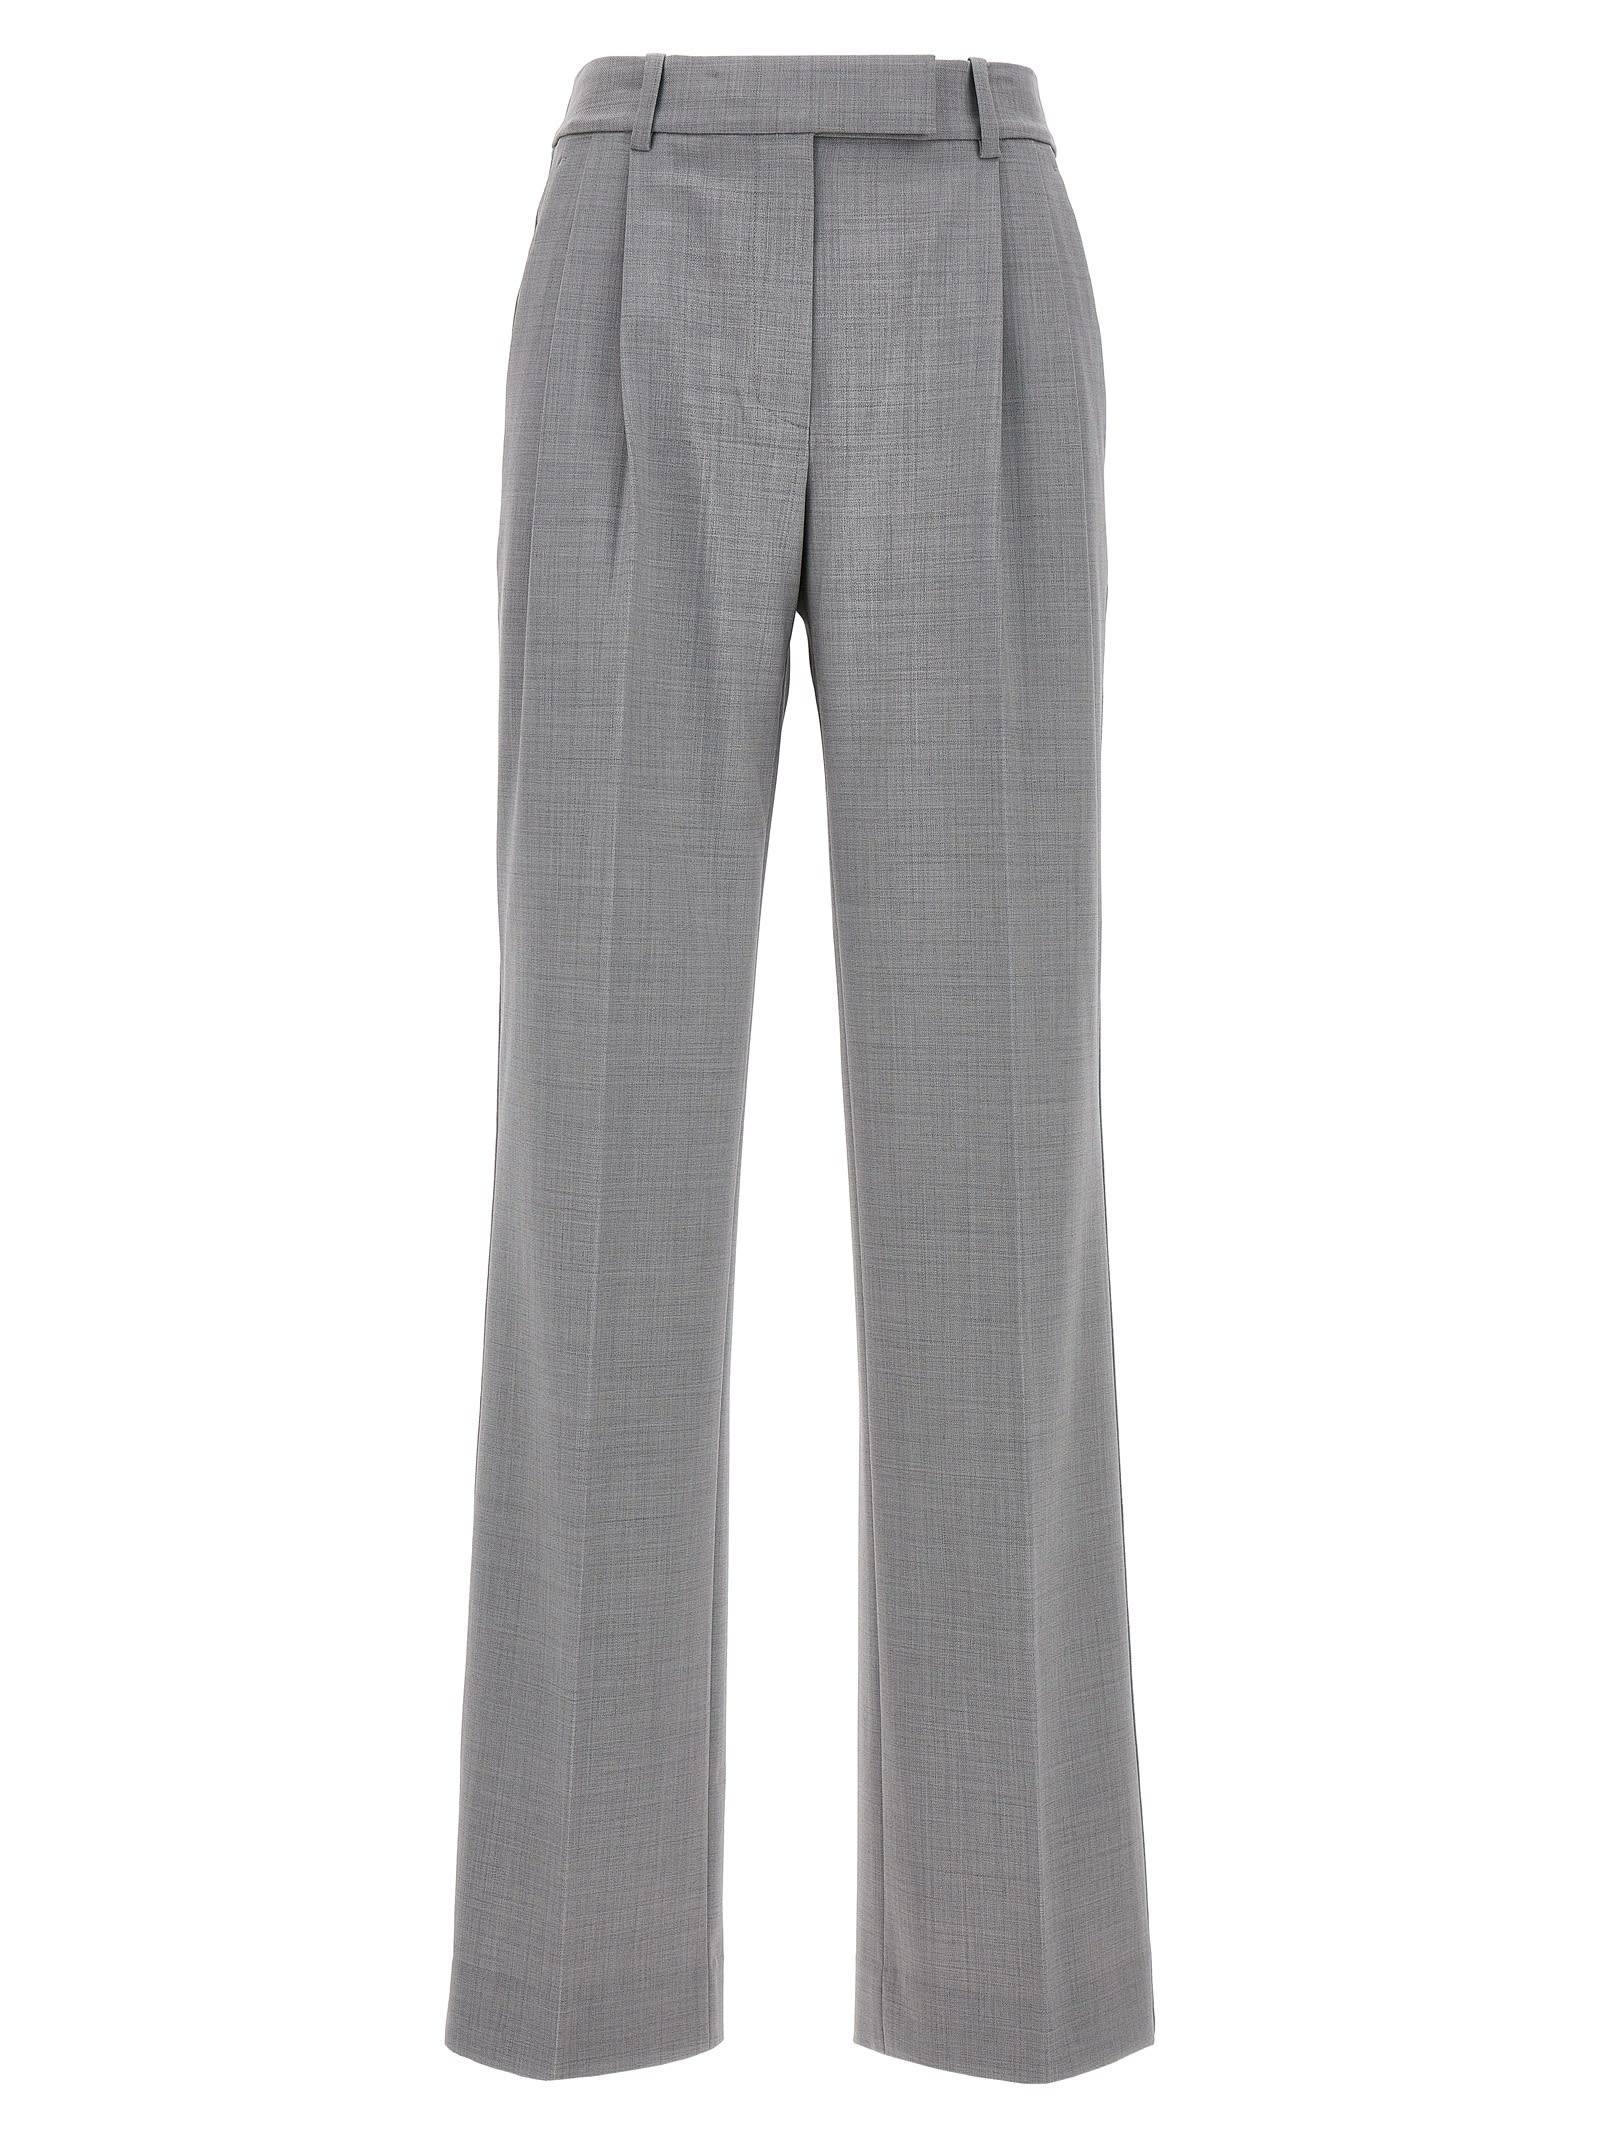 HELMUT LANG WOOL PANTS WITH FRONT PLEATS